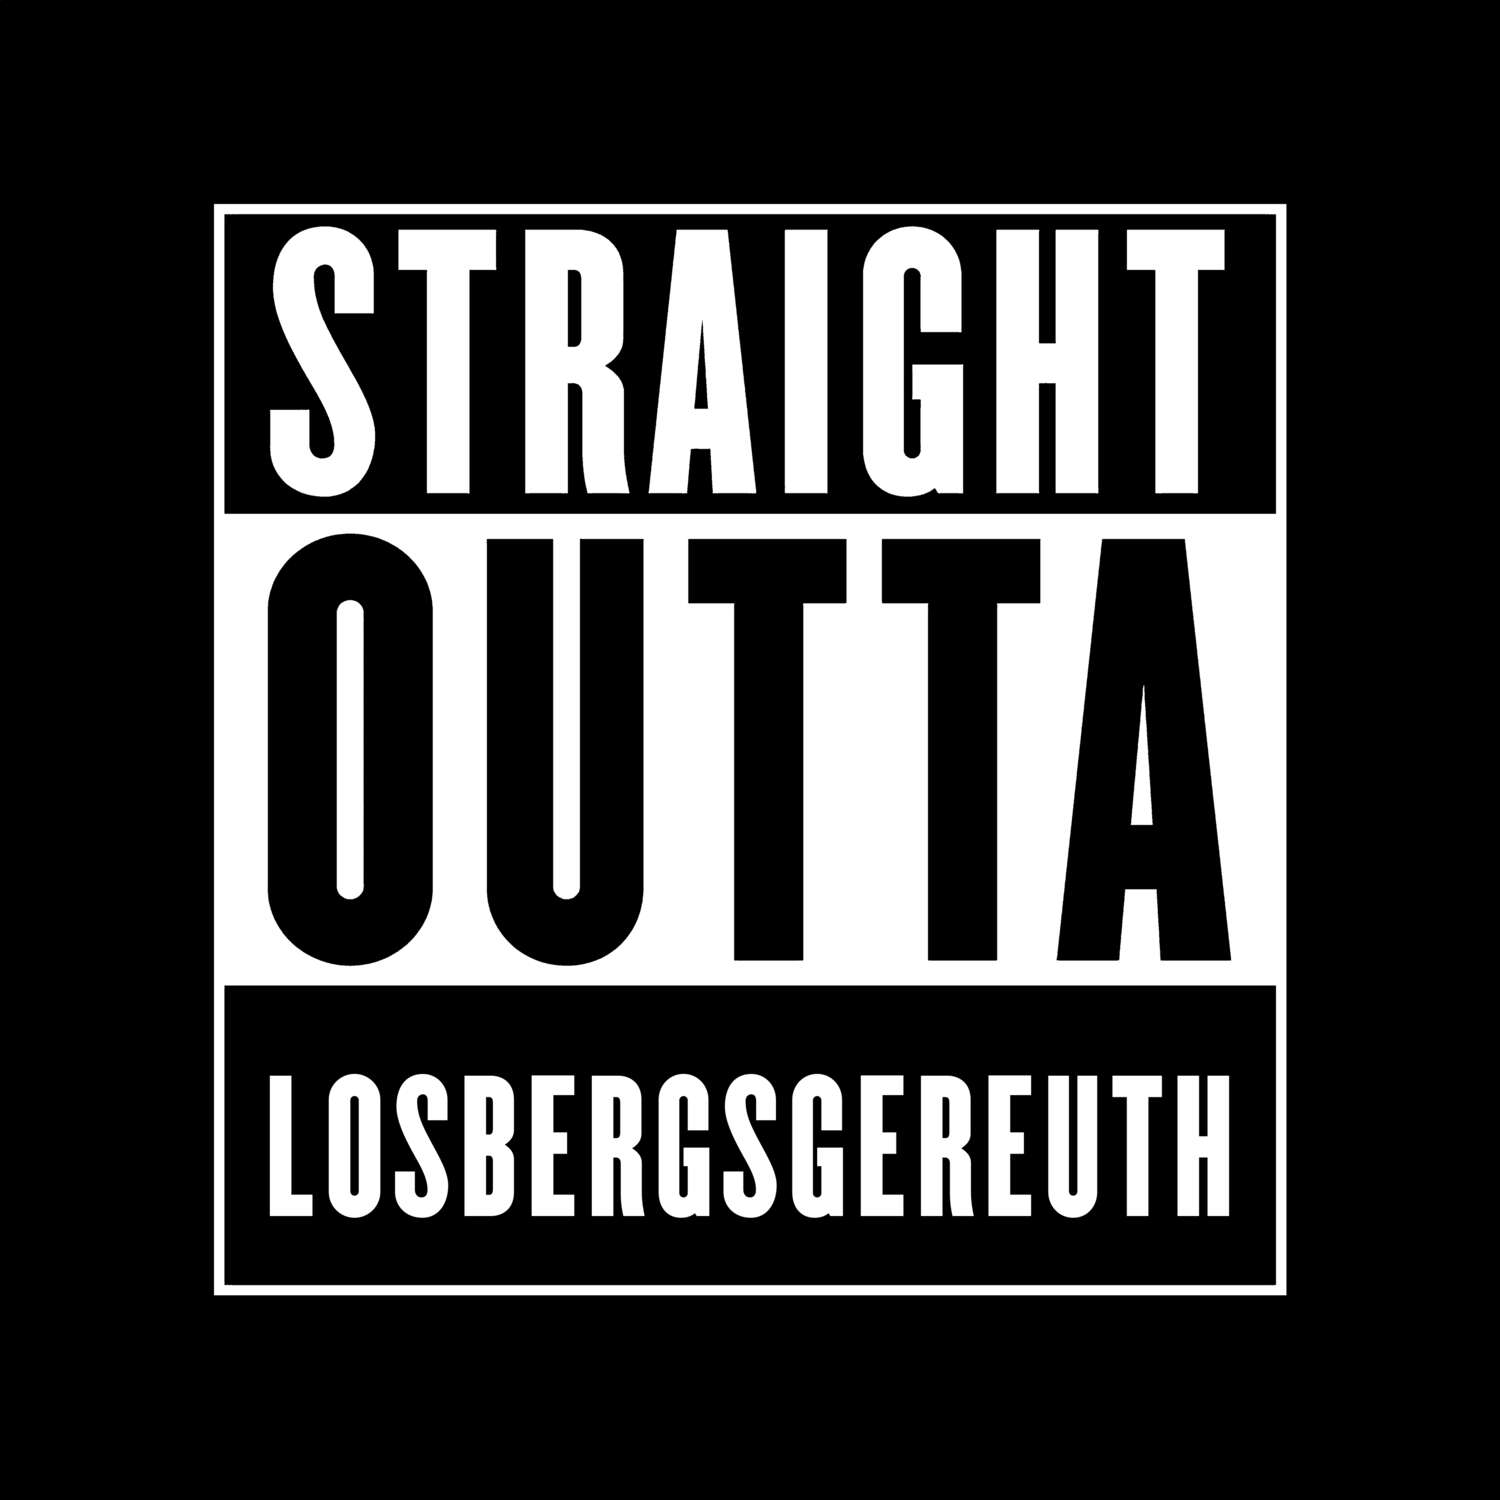 Losbergsgereuth T-Shirt »Straight Outta«